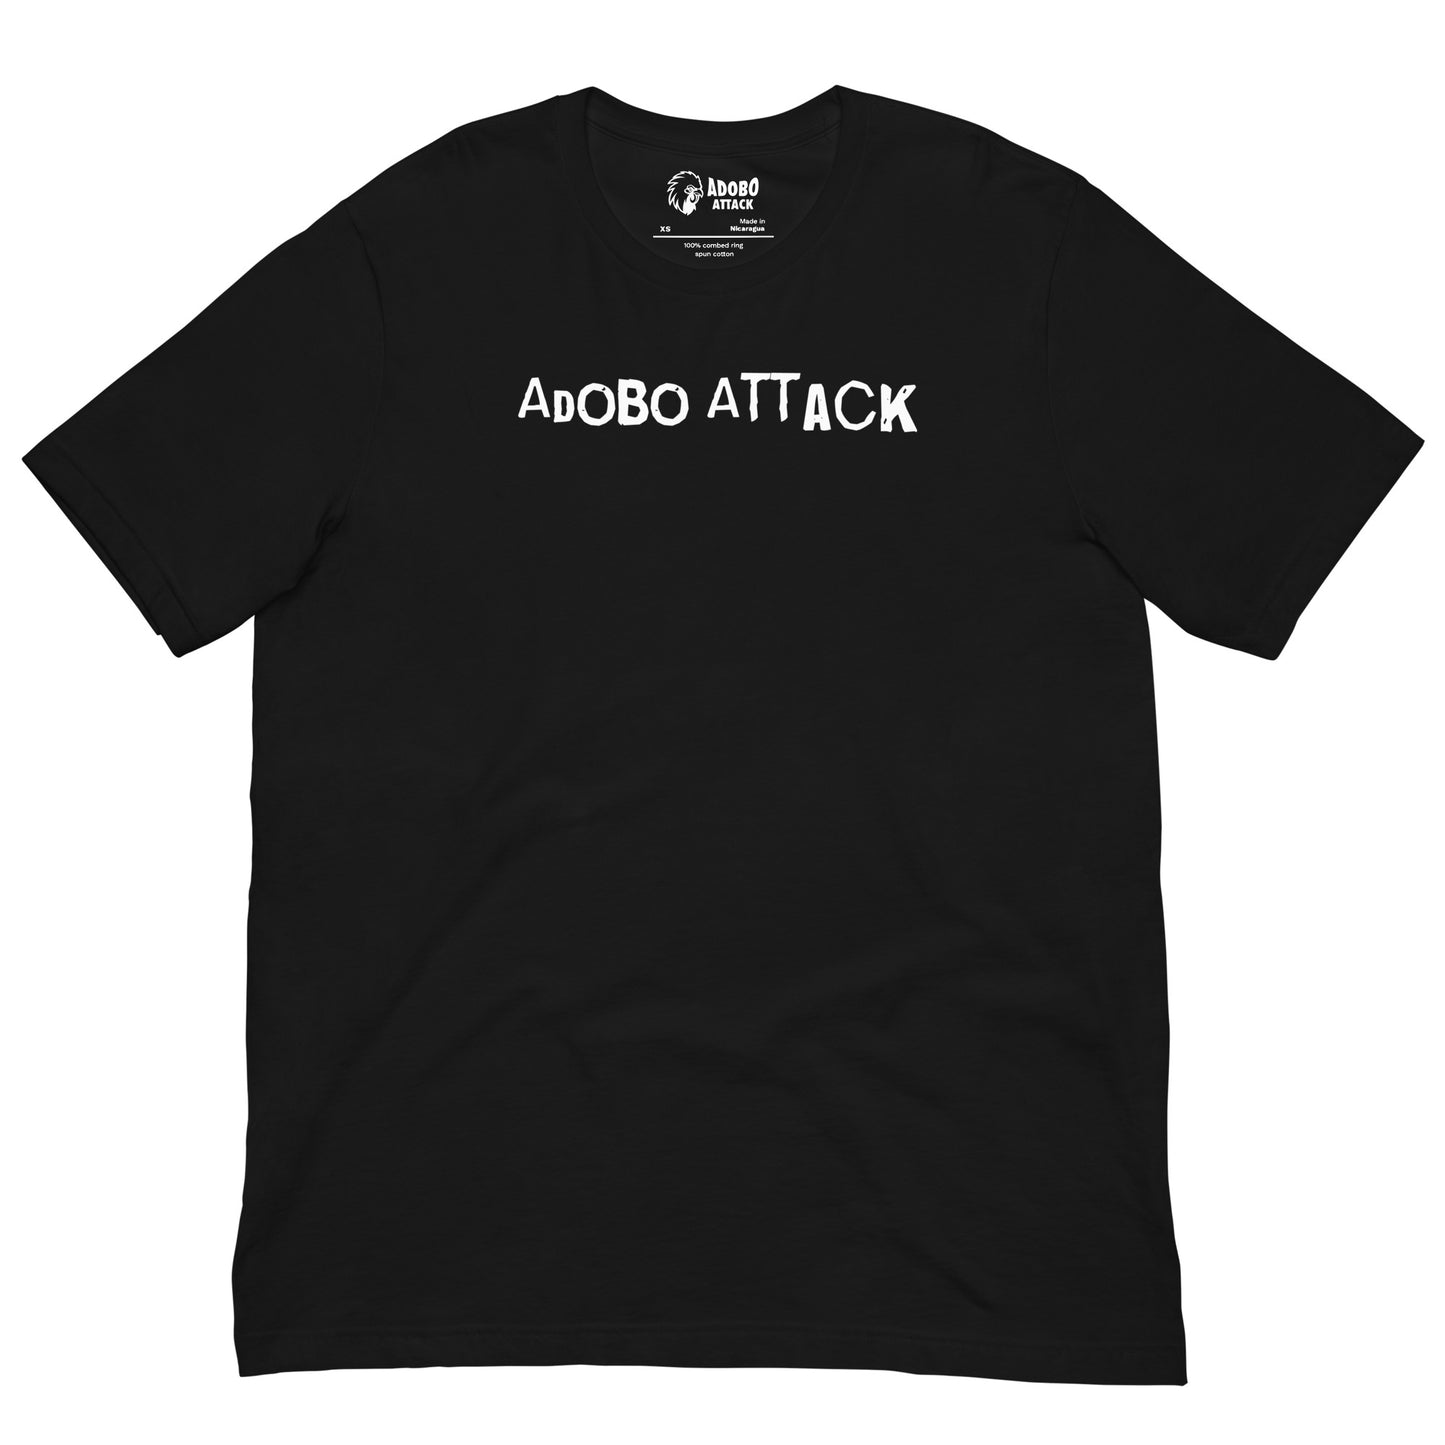 "Adobo Attack" Printed Tee